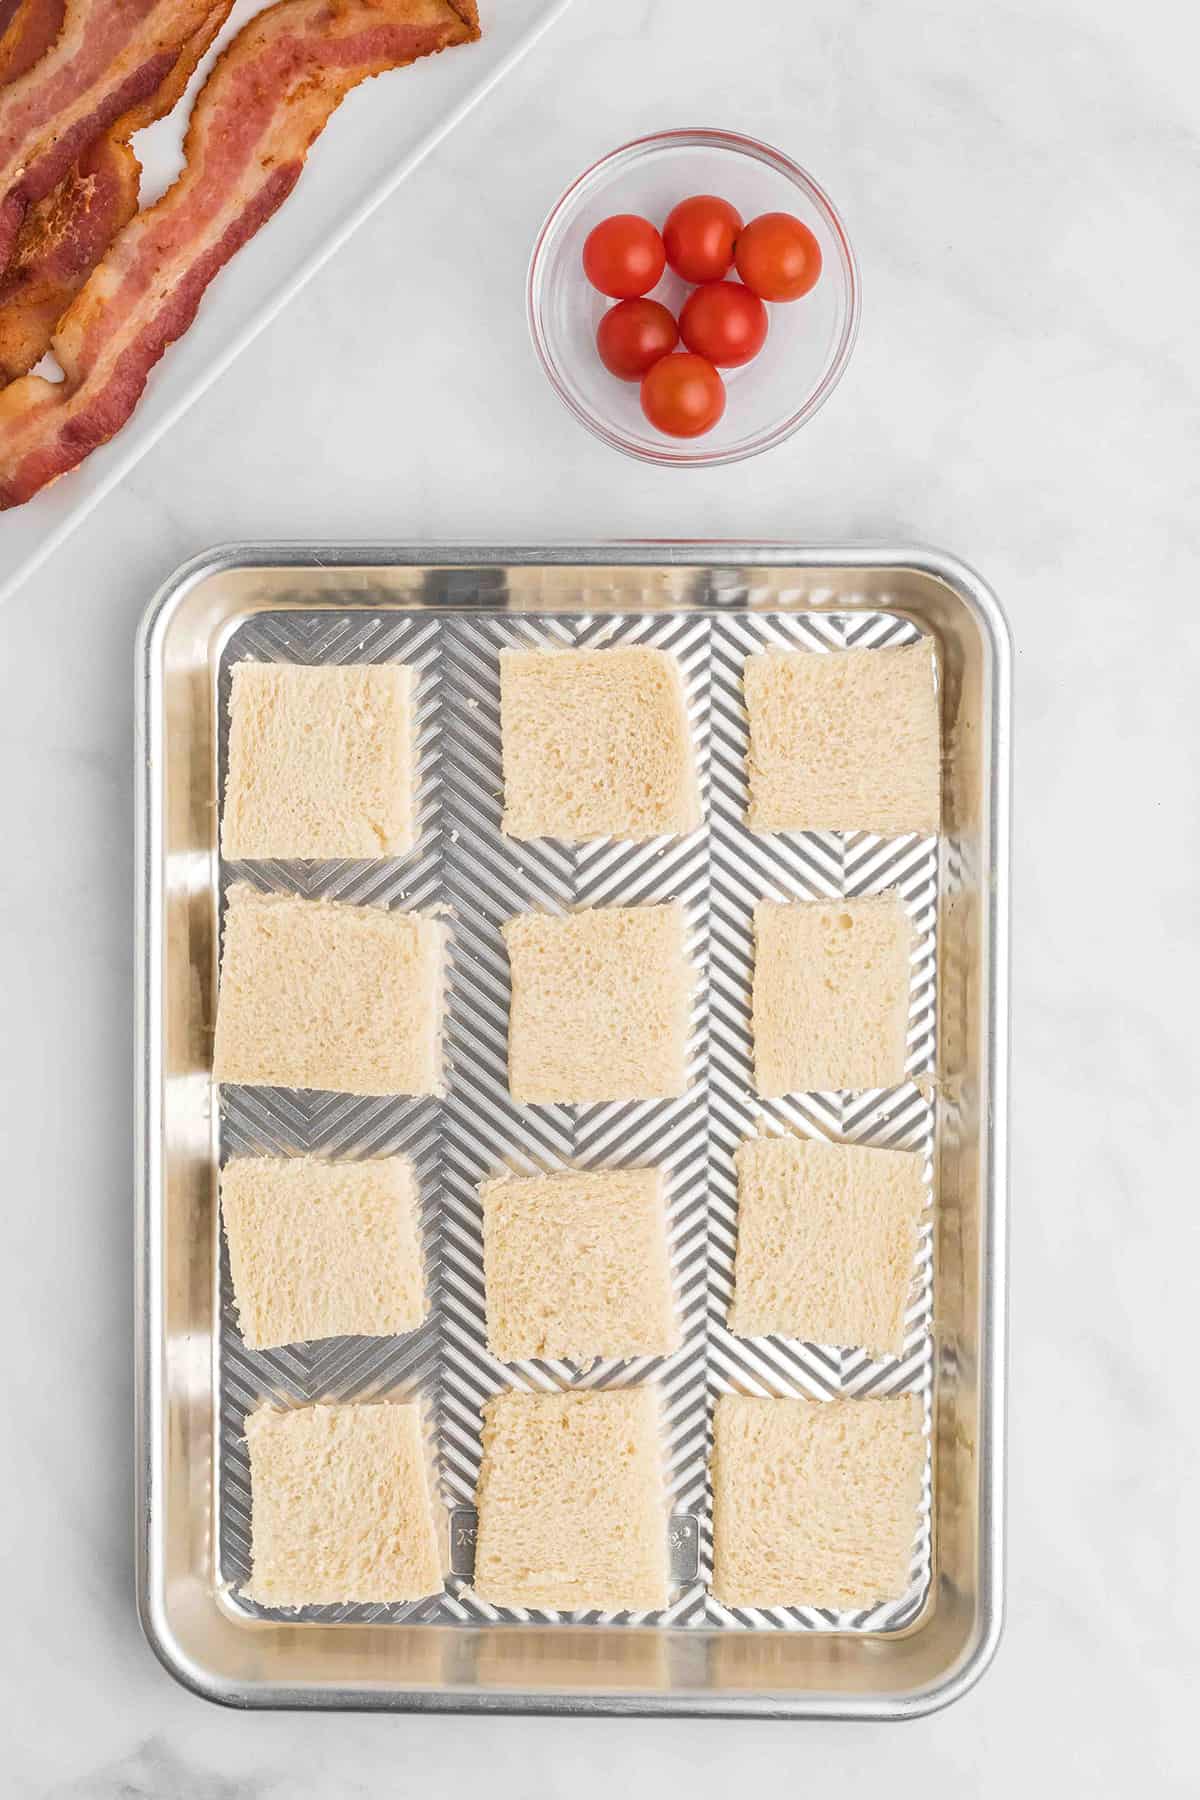 Bread rectangles placed on a baking sheet.